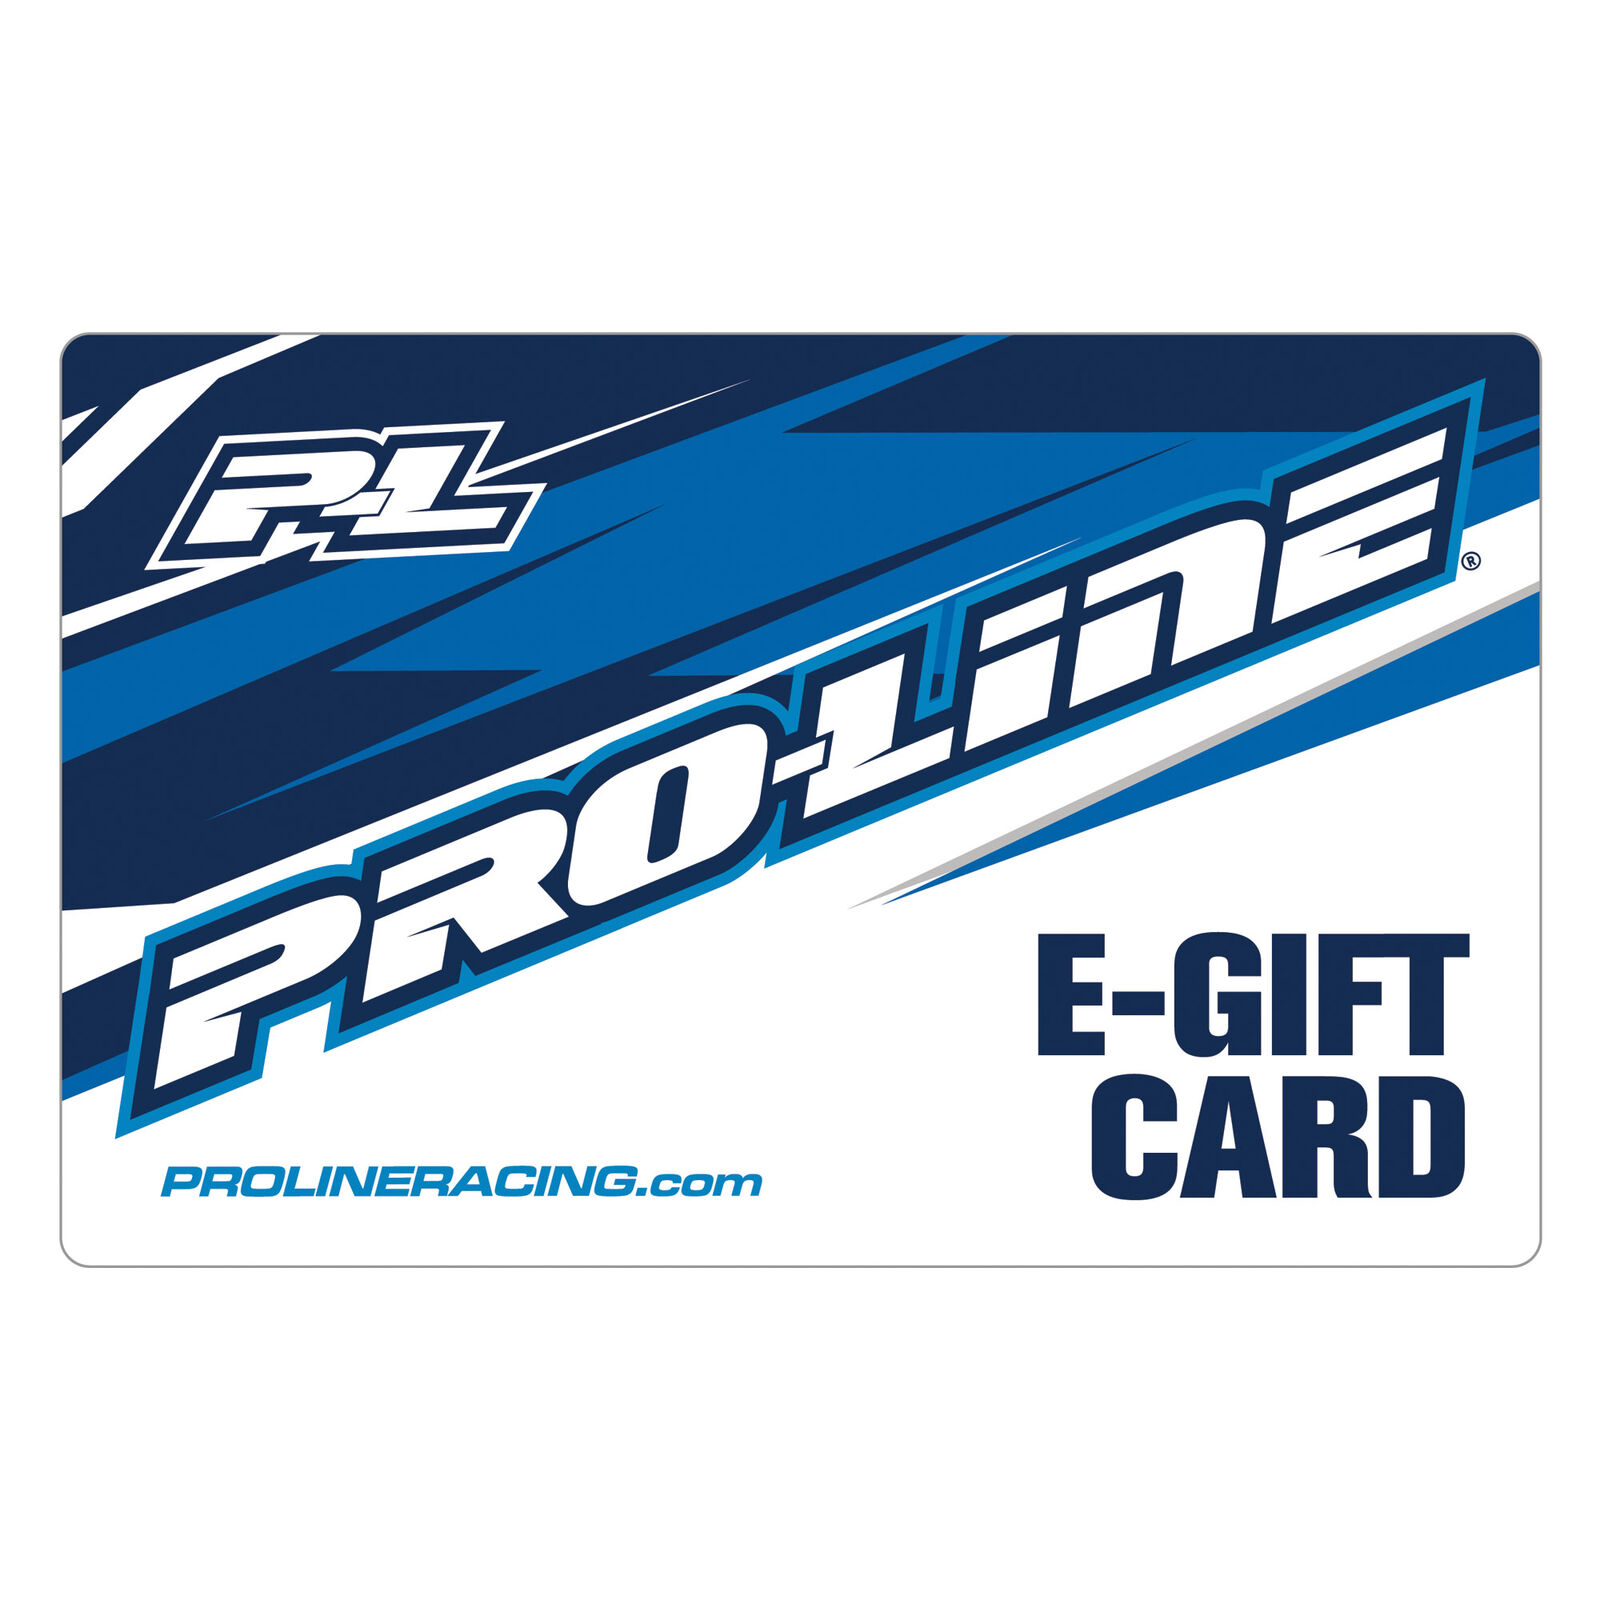 E-Gift Card $500 (emailed)